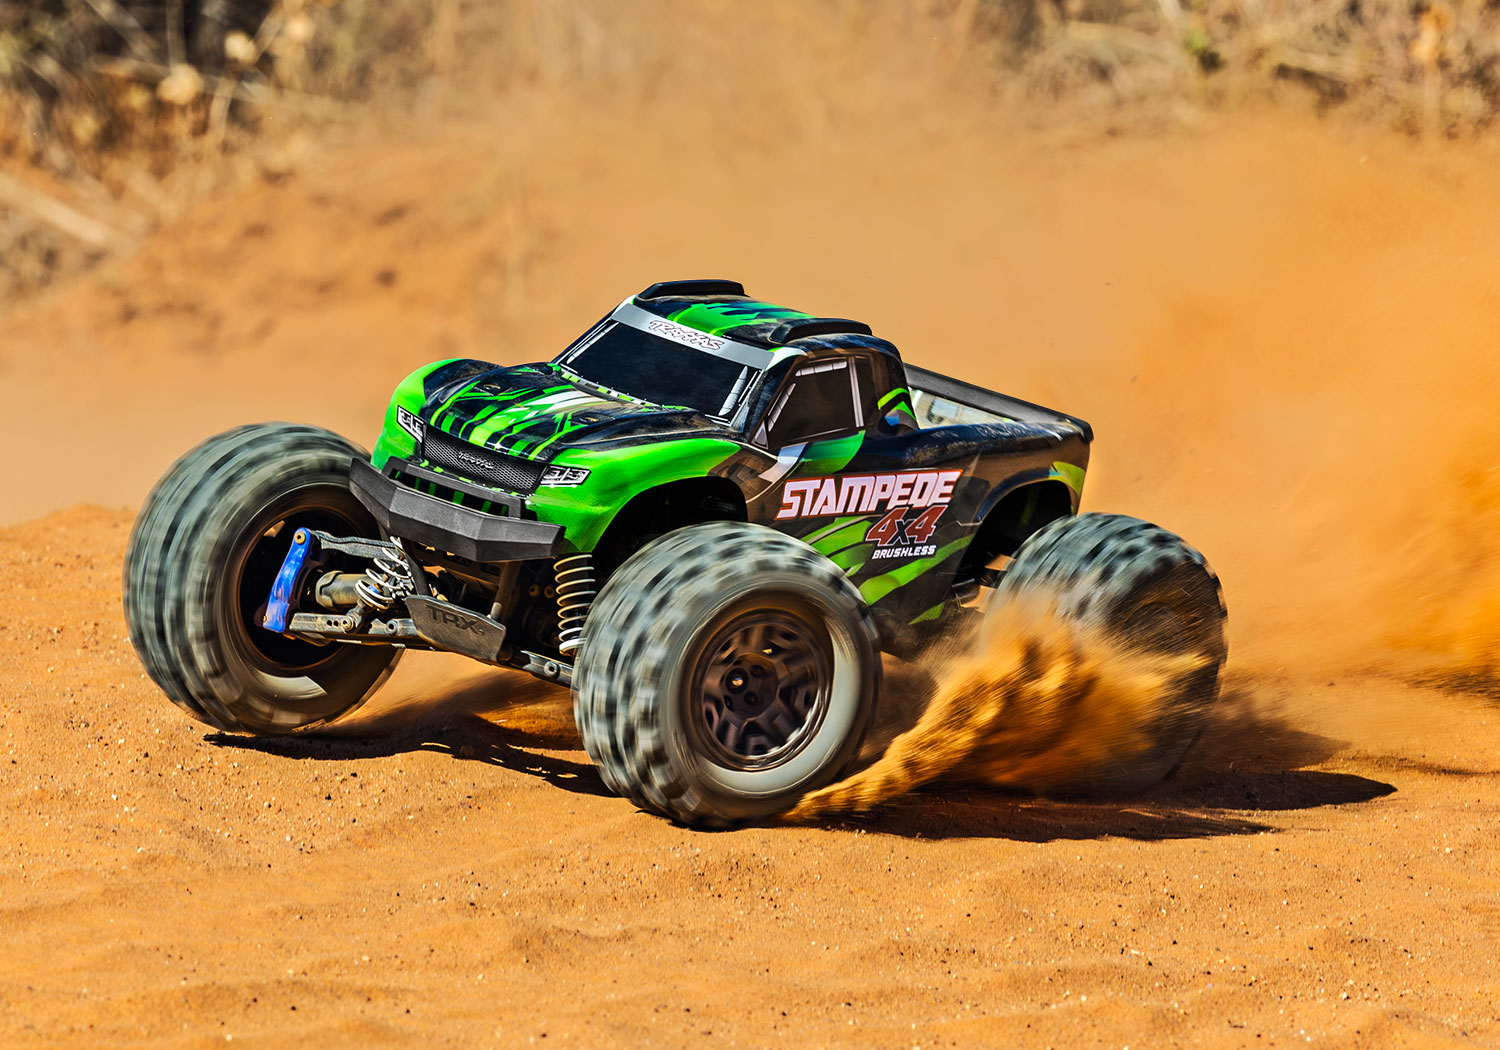 PACK ECO TRAXXAS STAMPEDE 1/10 4X4 BRUSHLESS BL-2S BLEU LIPO 2S CHARGEUR RAPIDE SAC OFFERT